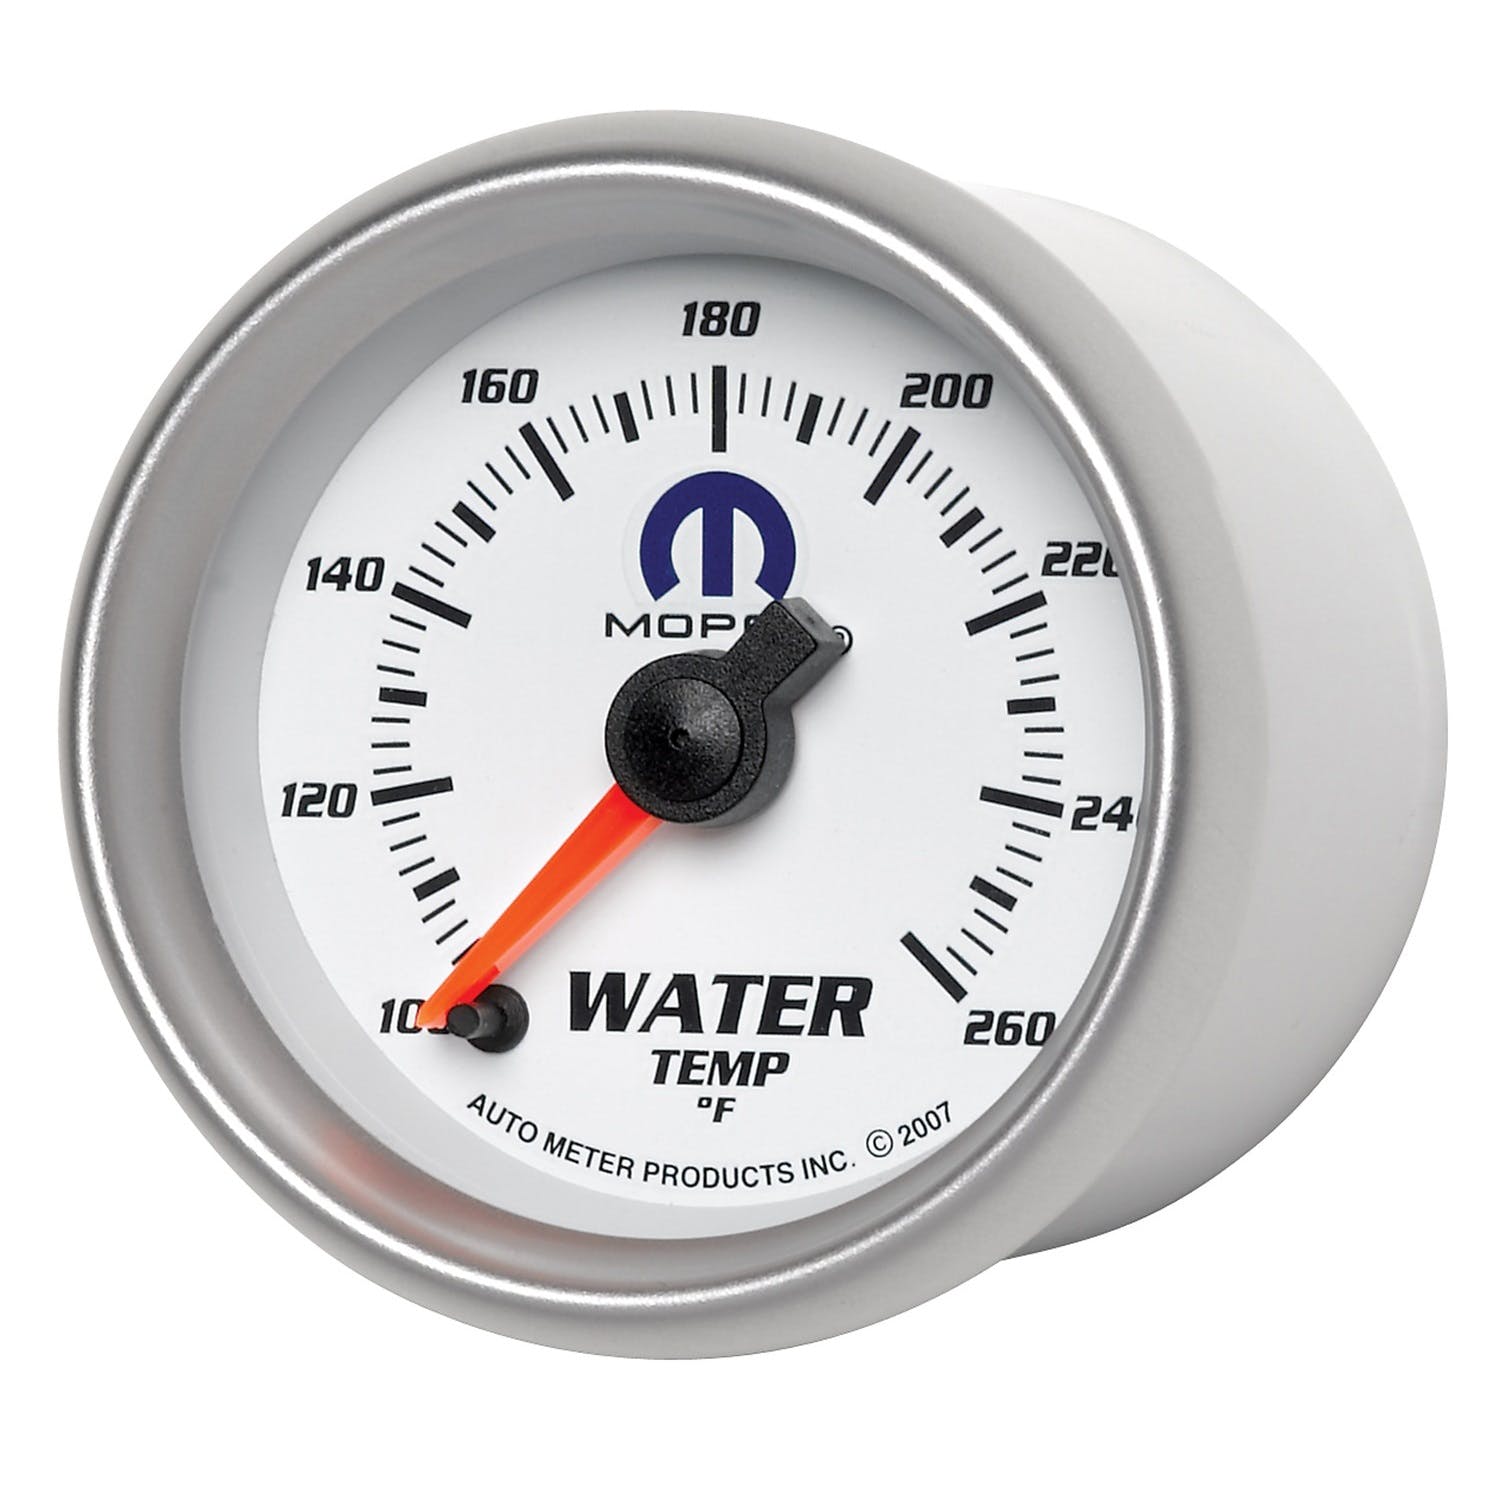 AutoMeter Products 880032 Mopar #77060052, 2-1/16 Water Temp, 100-260° F